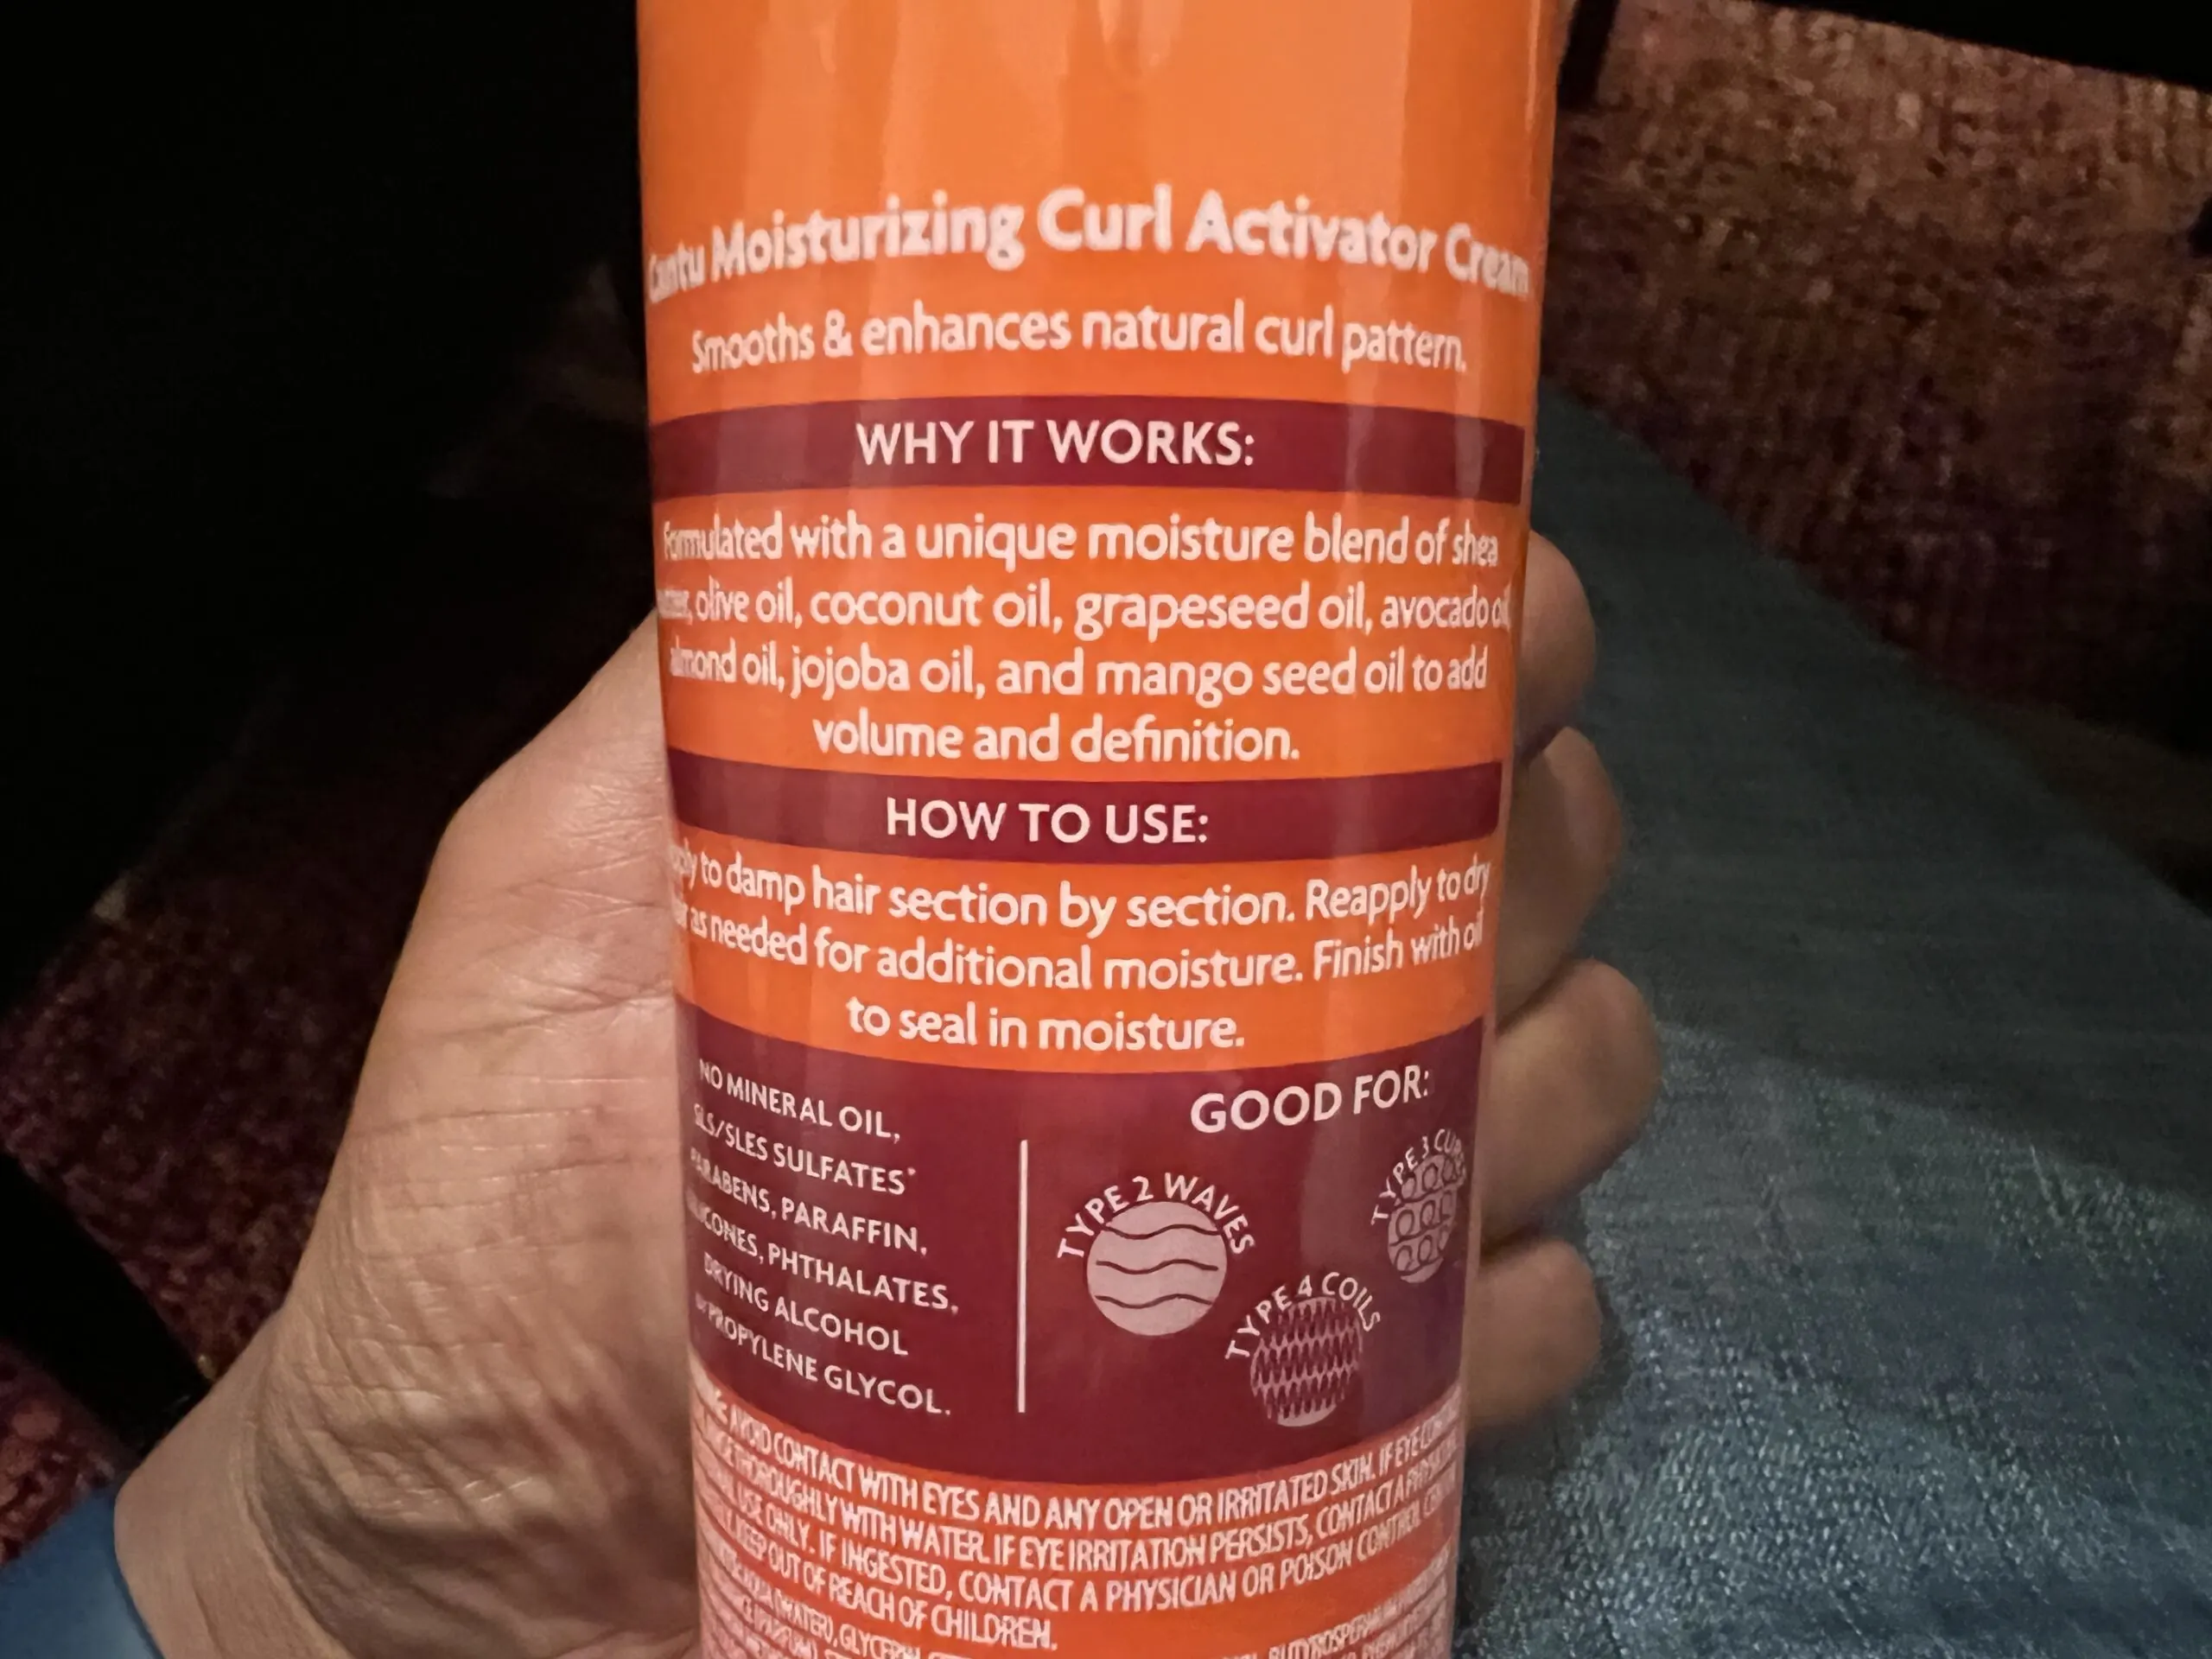 Applying Cantu Shea Moisturizing Curl Activator Cream to hair, showing its effectiveness in curl enhancement and shine.